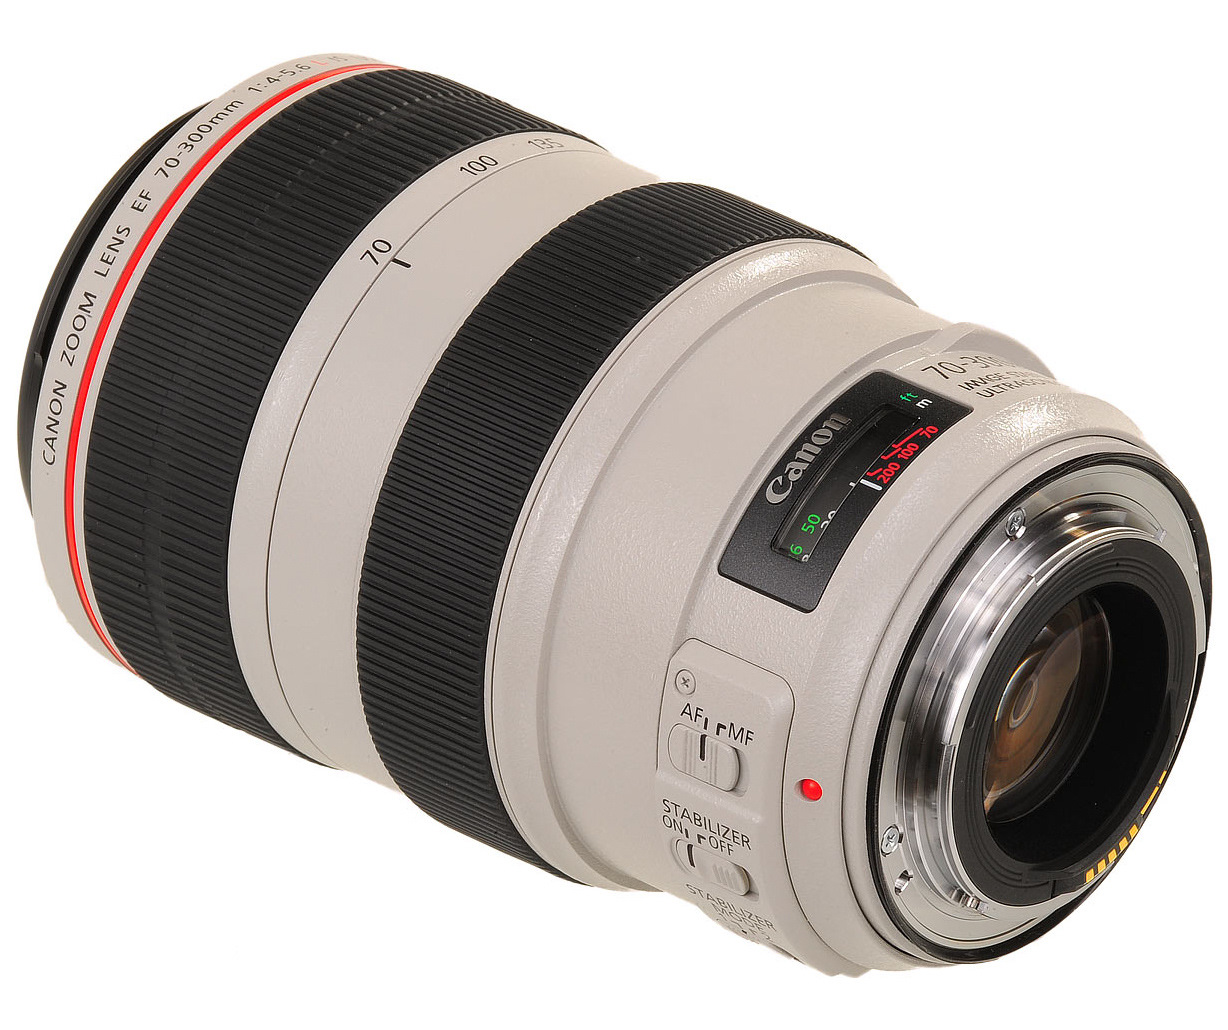 Canon 70 300mm f 5.6. Canon 70-300 is USM. Canon EF 70-300 f4-5.6. Canon EF 70-300mm f/4-5.6 is II USM. Canon 70-300 f 4-5.6 is USM.